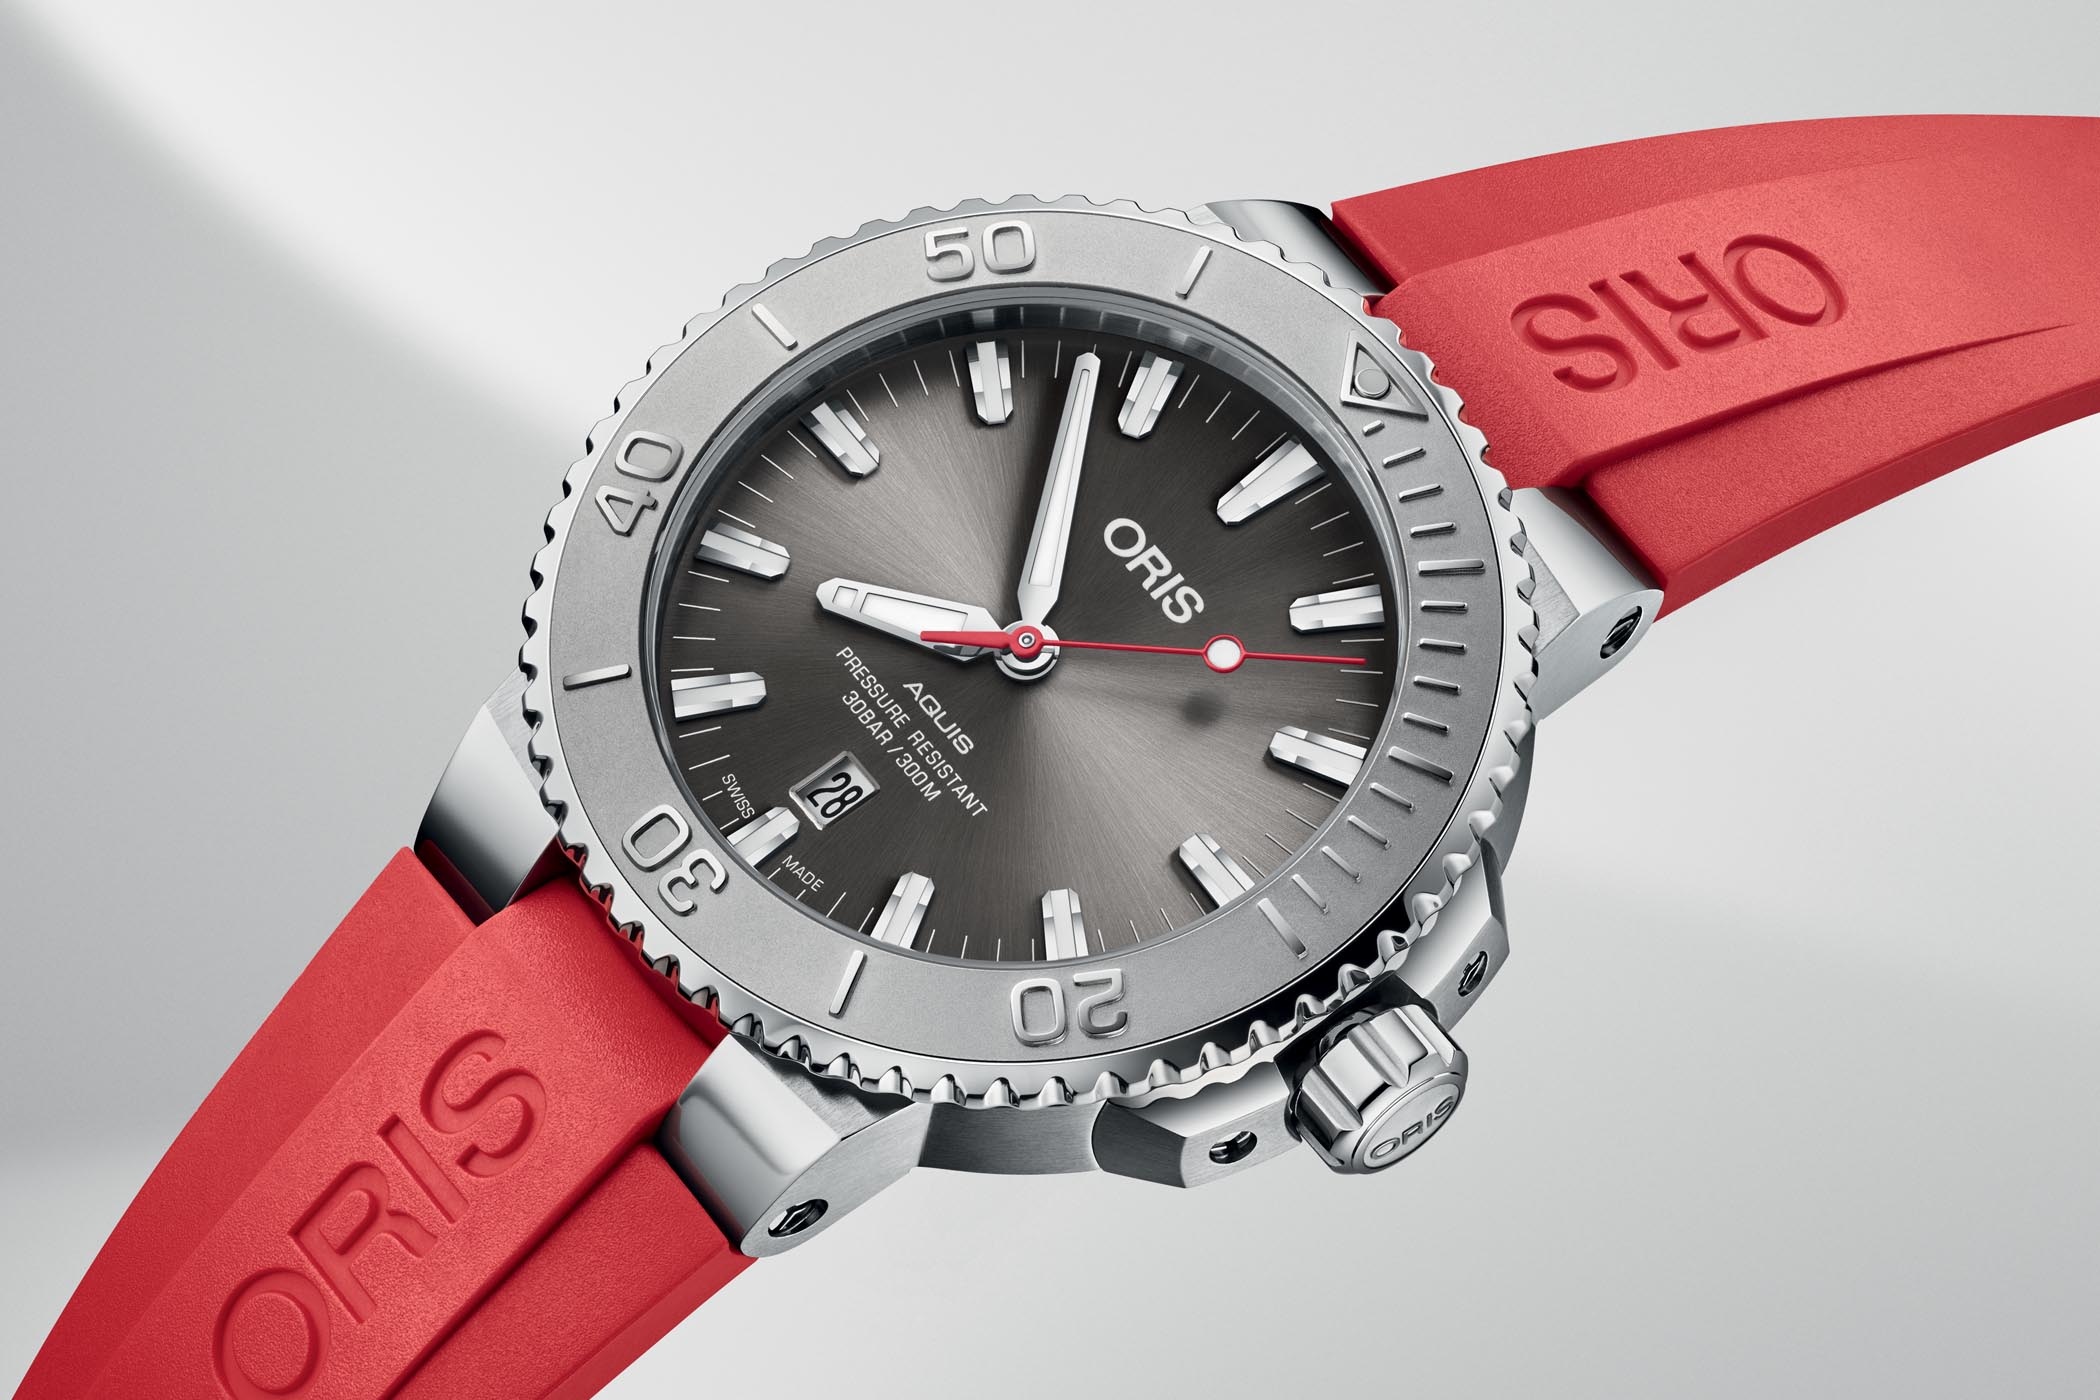 The Shape of Water Introducing the Oris Aquis Date Relief